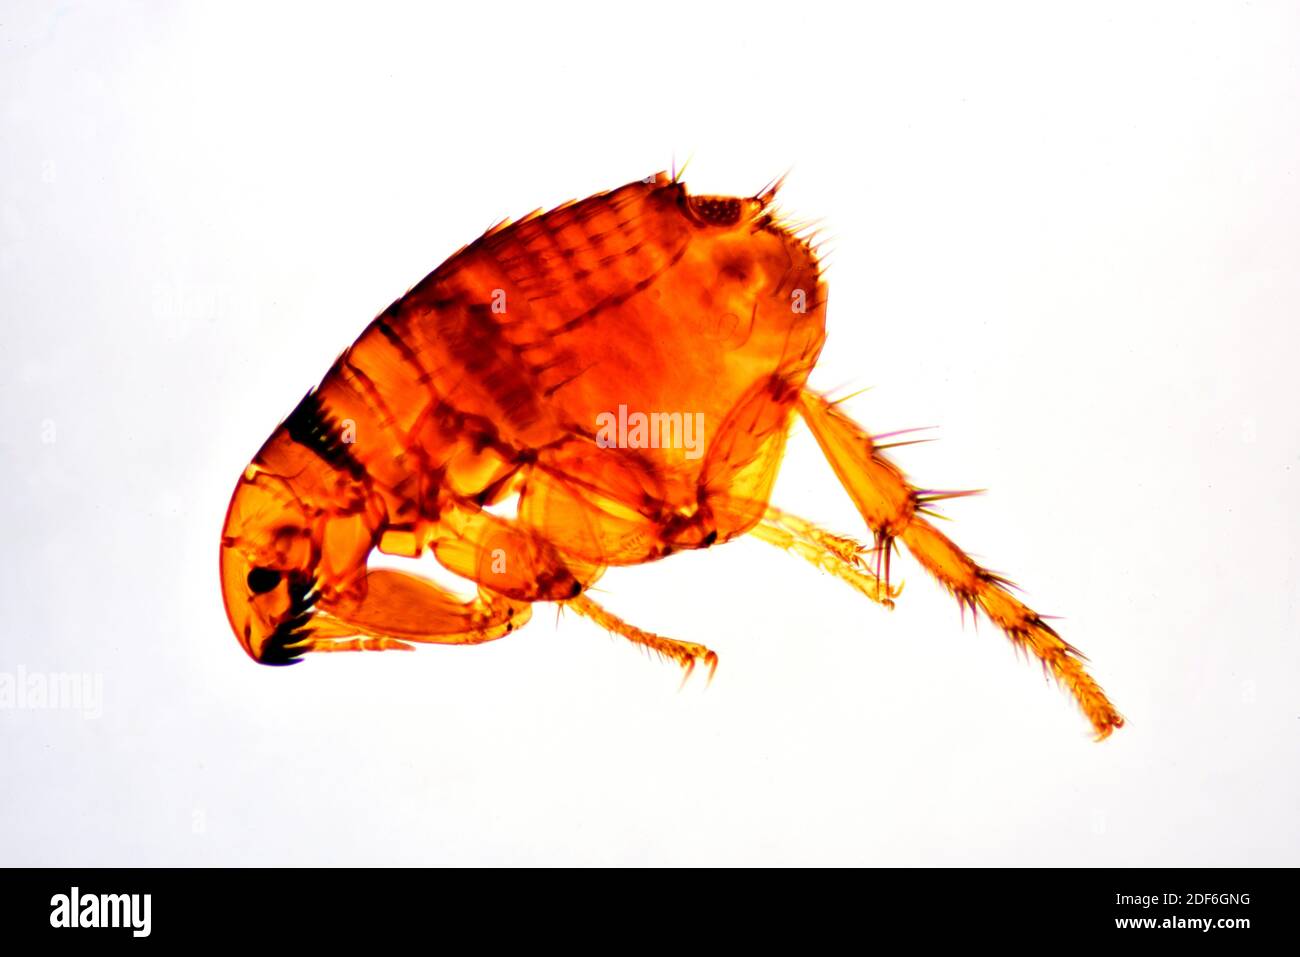 Dog flea (Ctenocephalides canis) is an hematophagous parasitic insect. Complete specimen. Optical microscope X40. Stock Photo